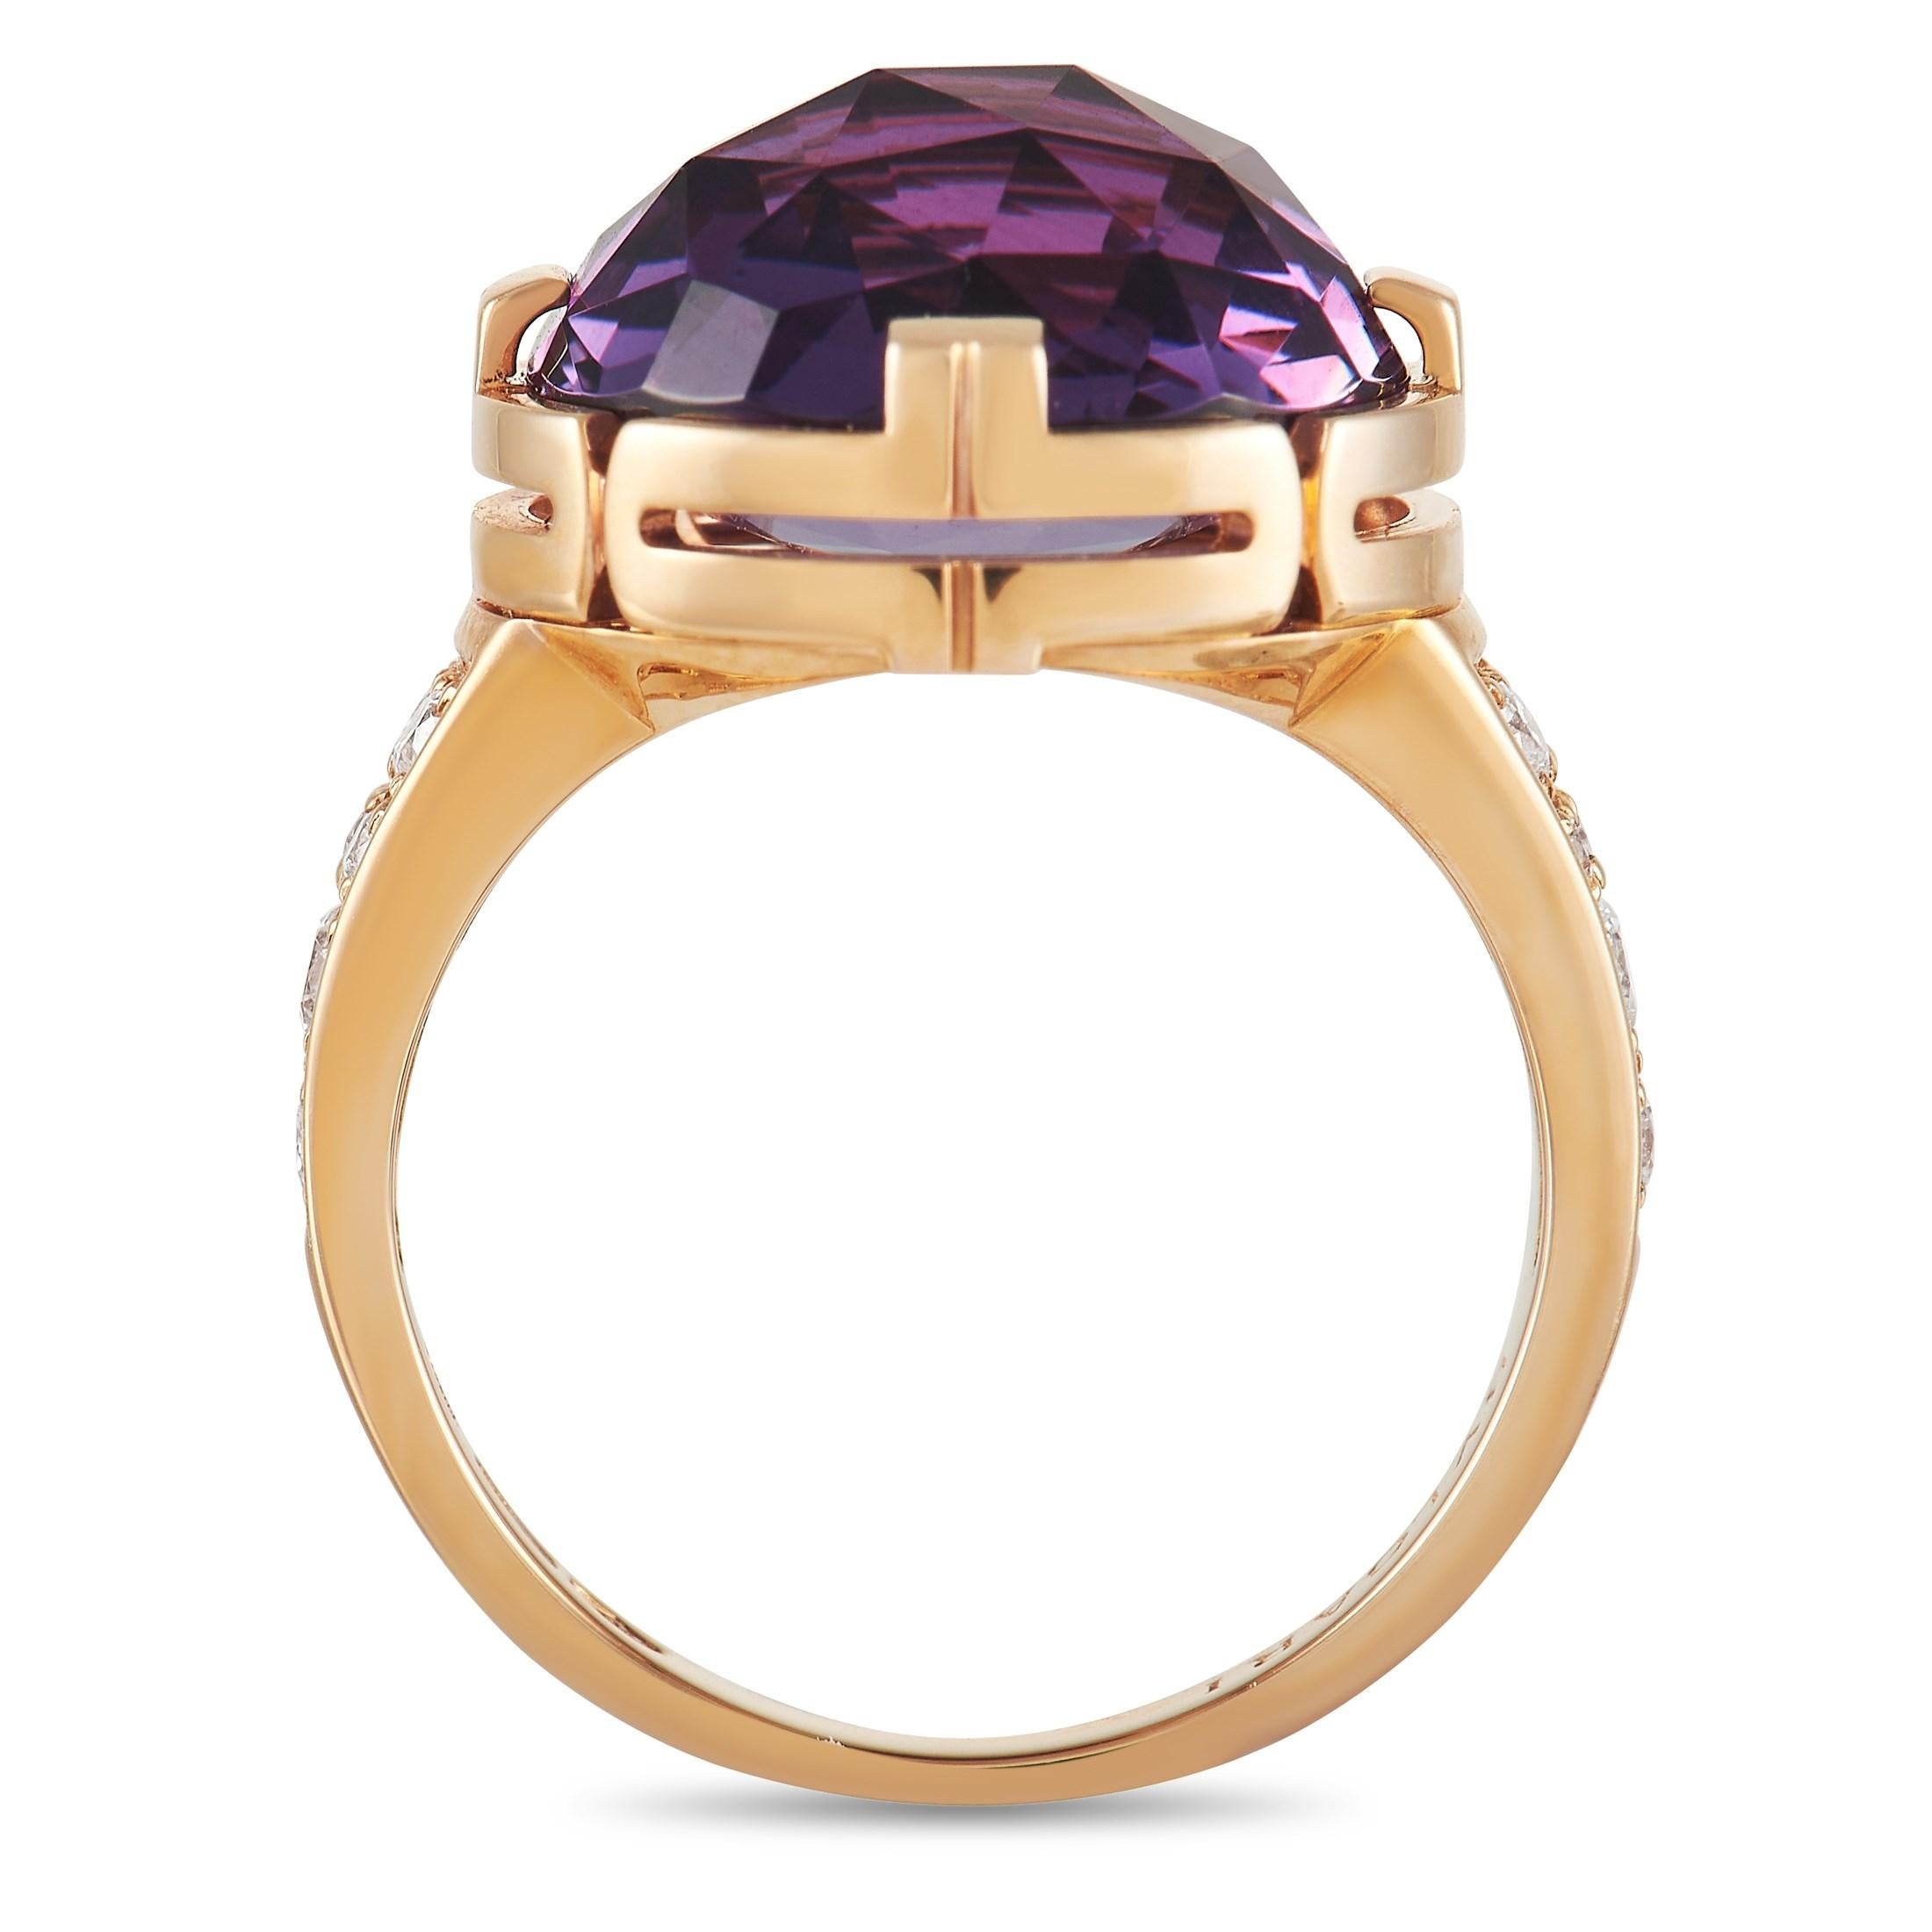 An opulent 18K rose gold setting beautifully highlights this Bvlgari Parentesi ring’s exquisite gemstones. At the center, you’ll find a breathtaking multifaceted amethyst. Diamonds totaling 0.30 carats add a touch of added luxury to the band. This